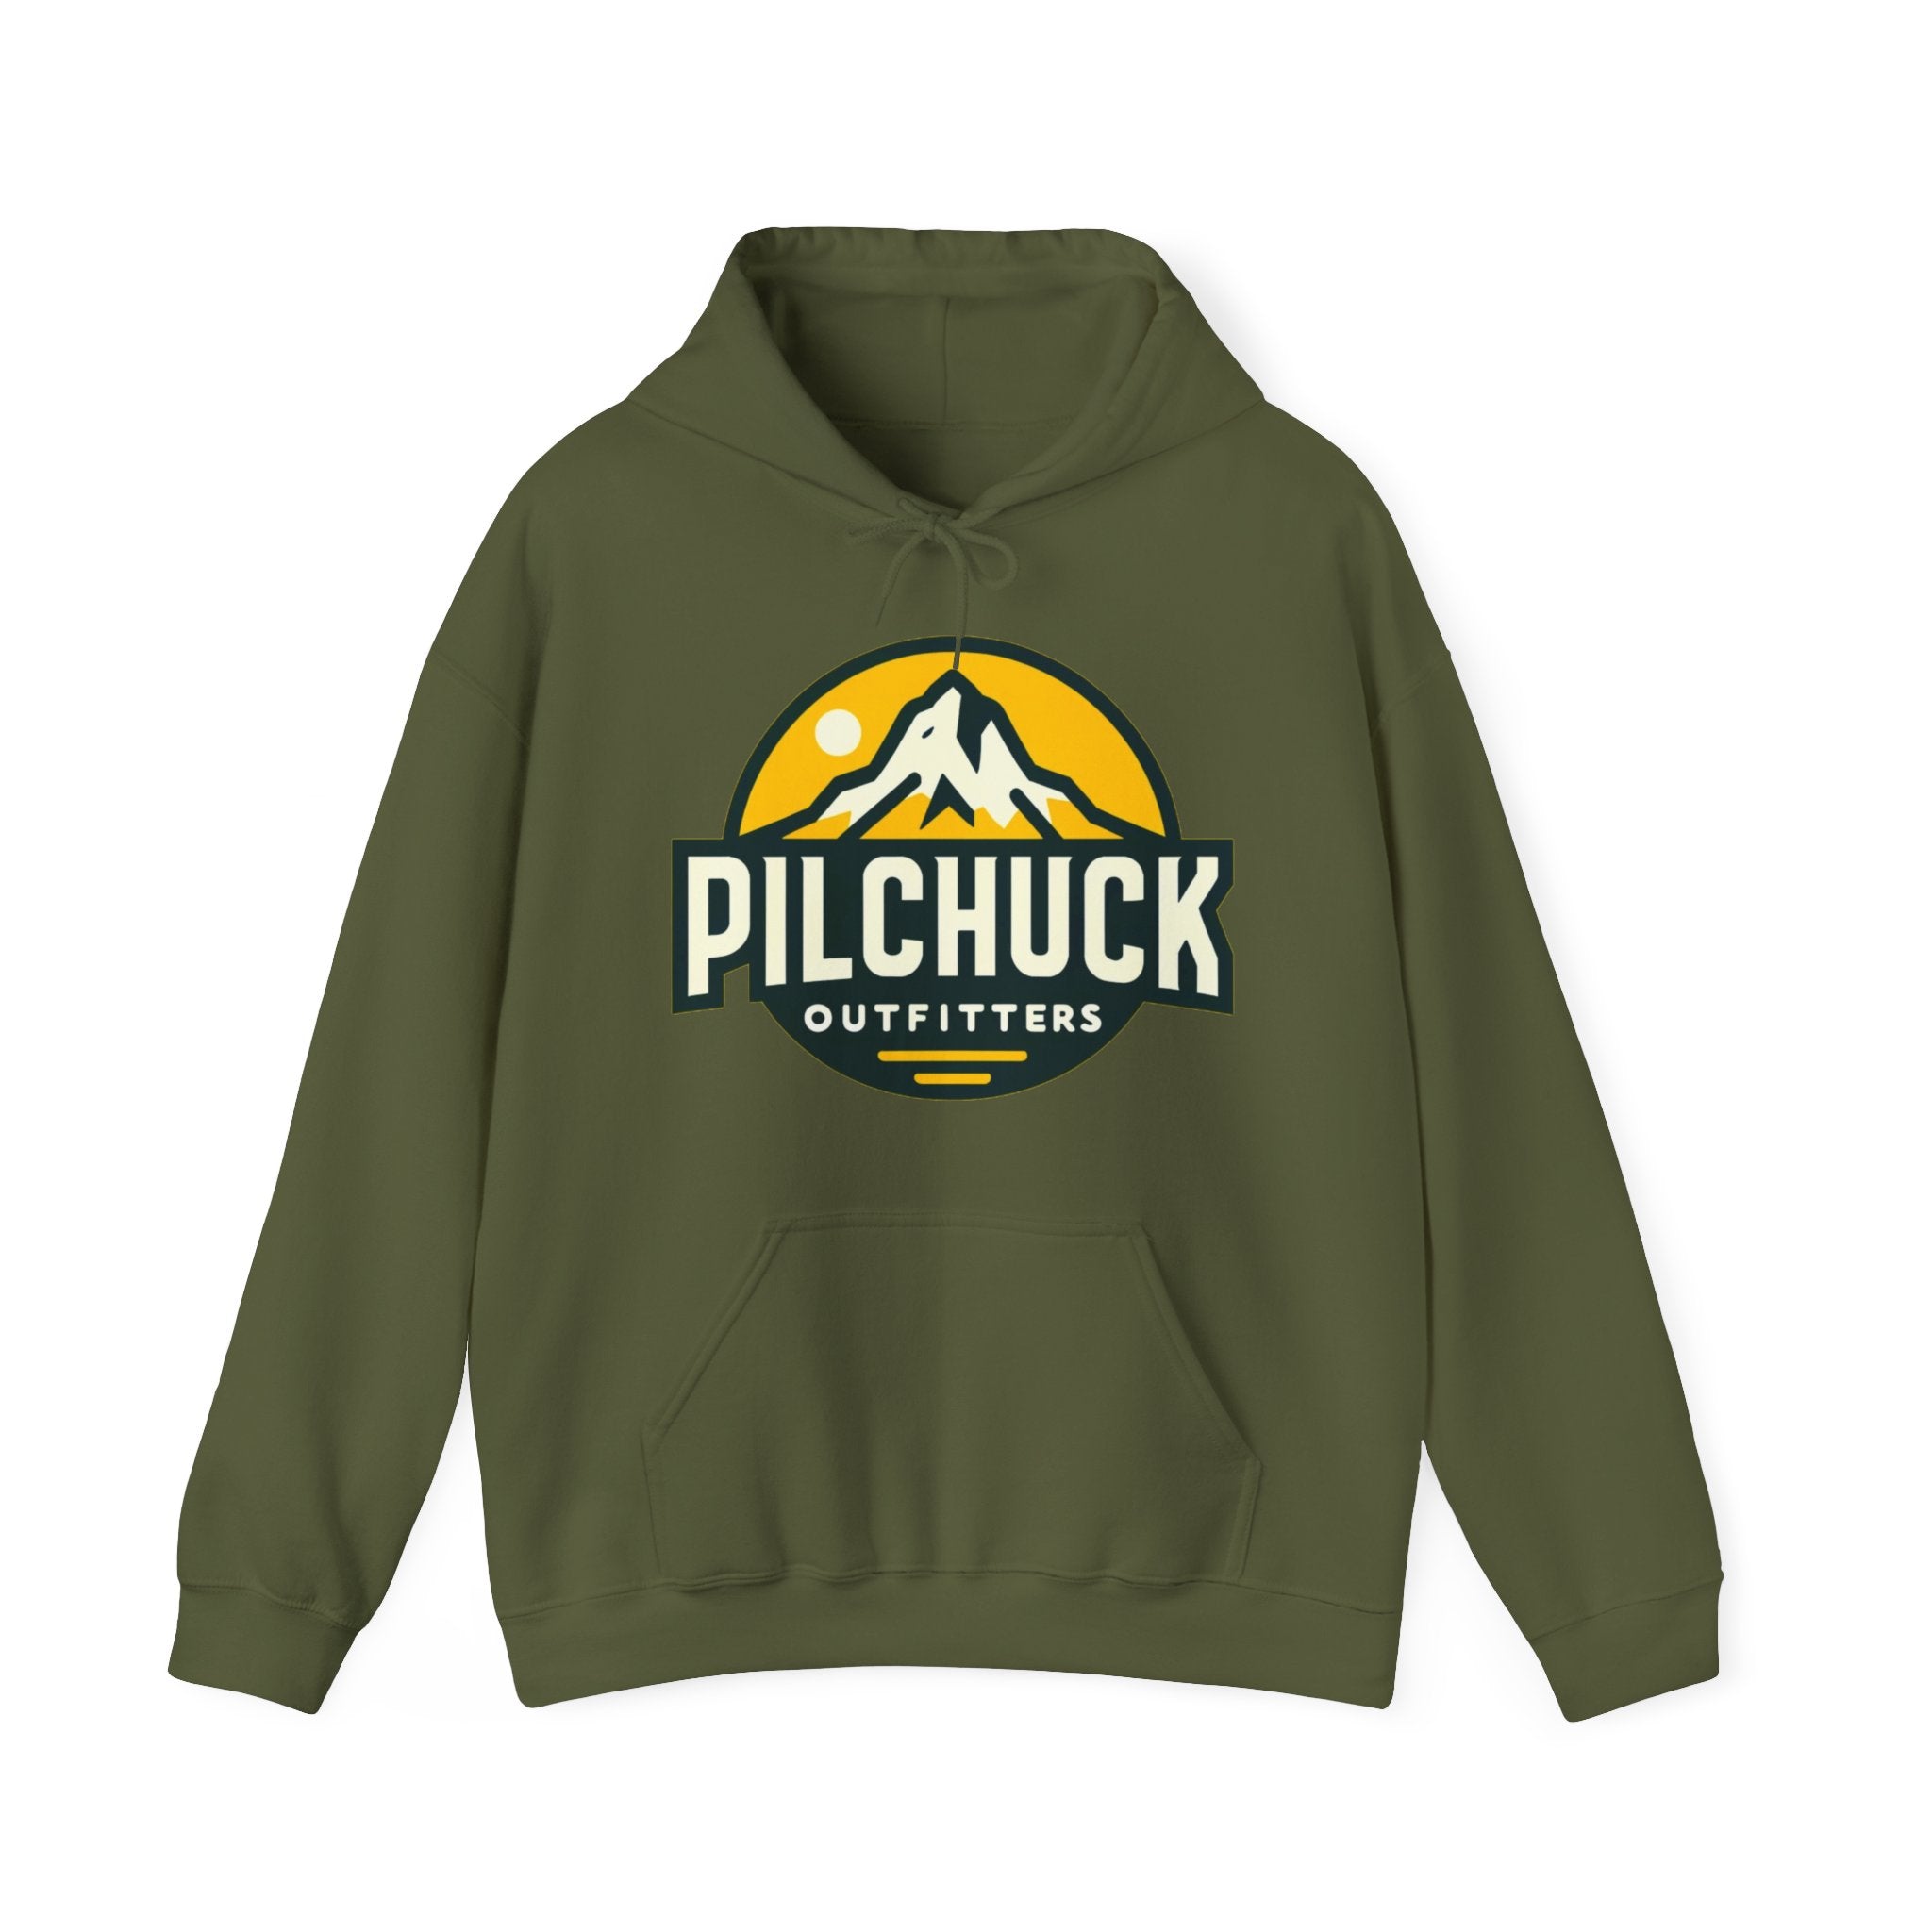 Classic Big Logo Pilchuck Outfitters Unisex Heavy Blend Hooded Sweatshirt